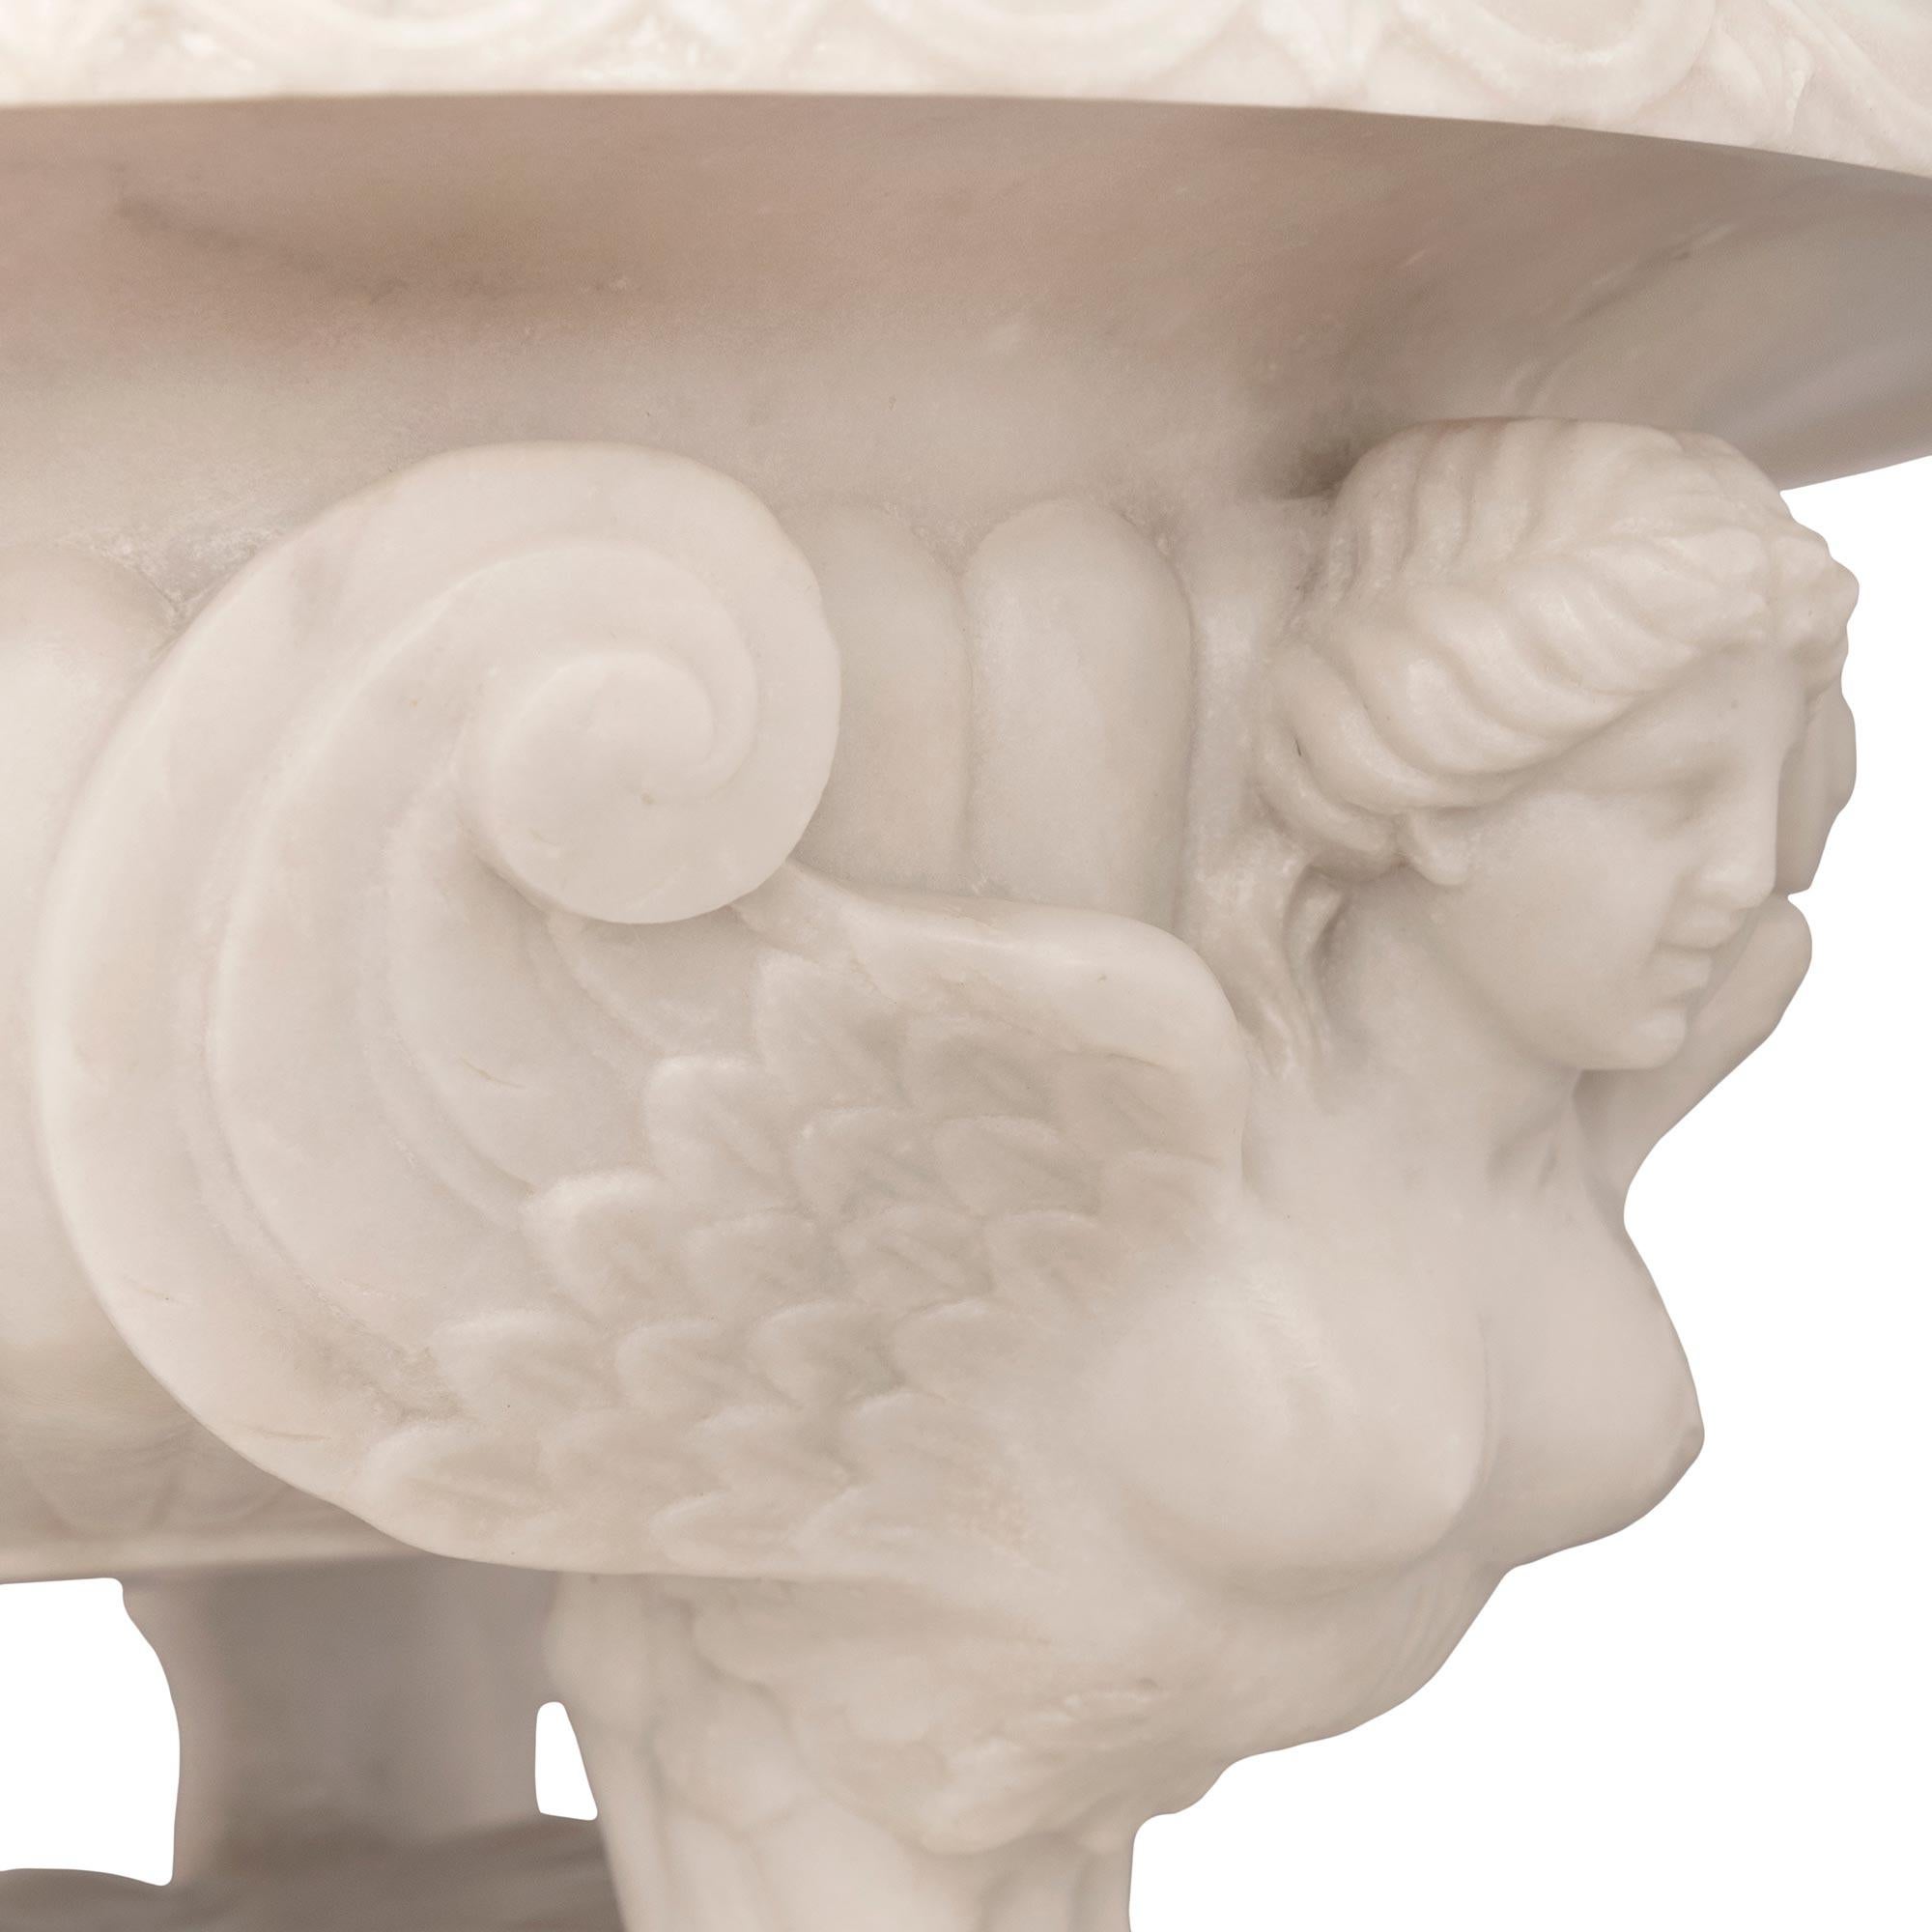 Italian 19th Century Neo-Classical St. White Carrara Marble Centerpiece Bowl For Sale 1